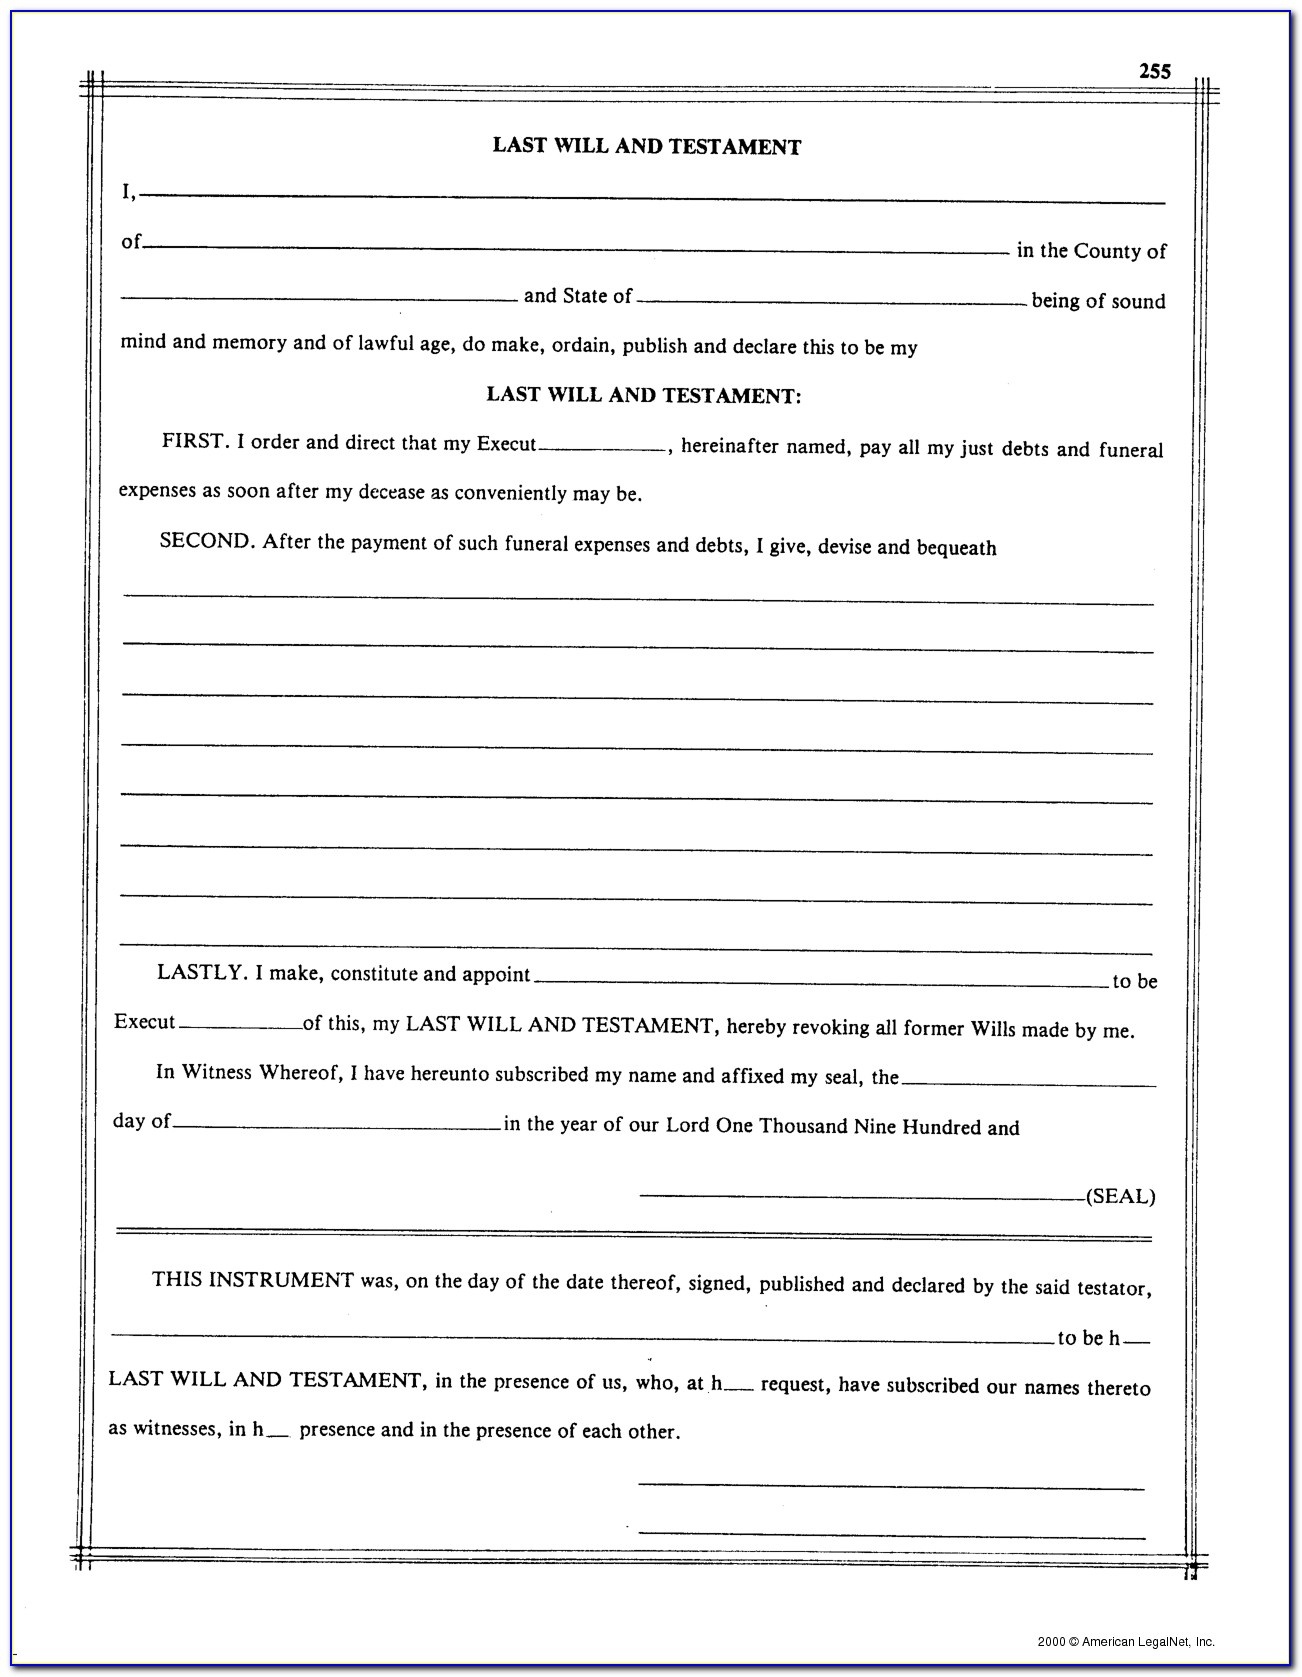 Free Printable Blank Last Will And Testament Forms - Form : Resume - Free Printable Last Will And Testament Forms